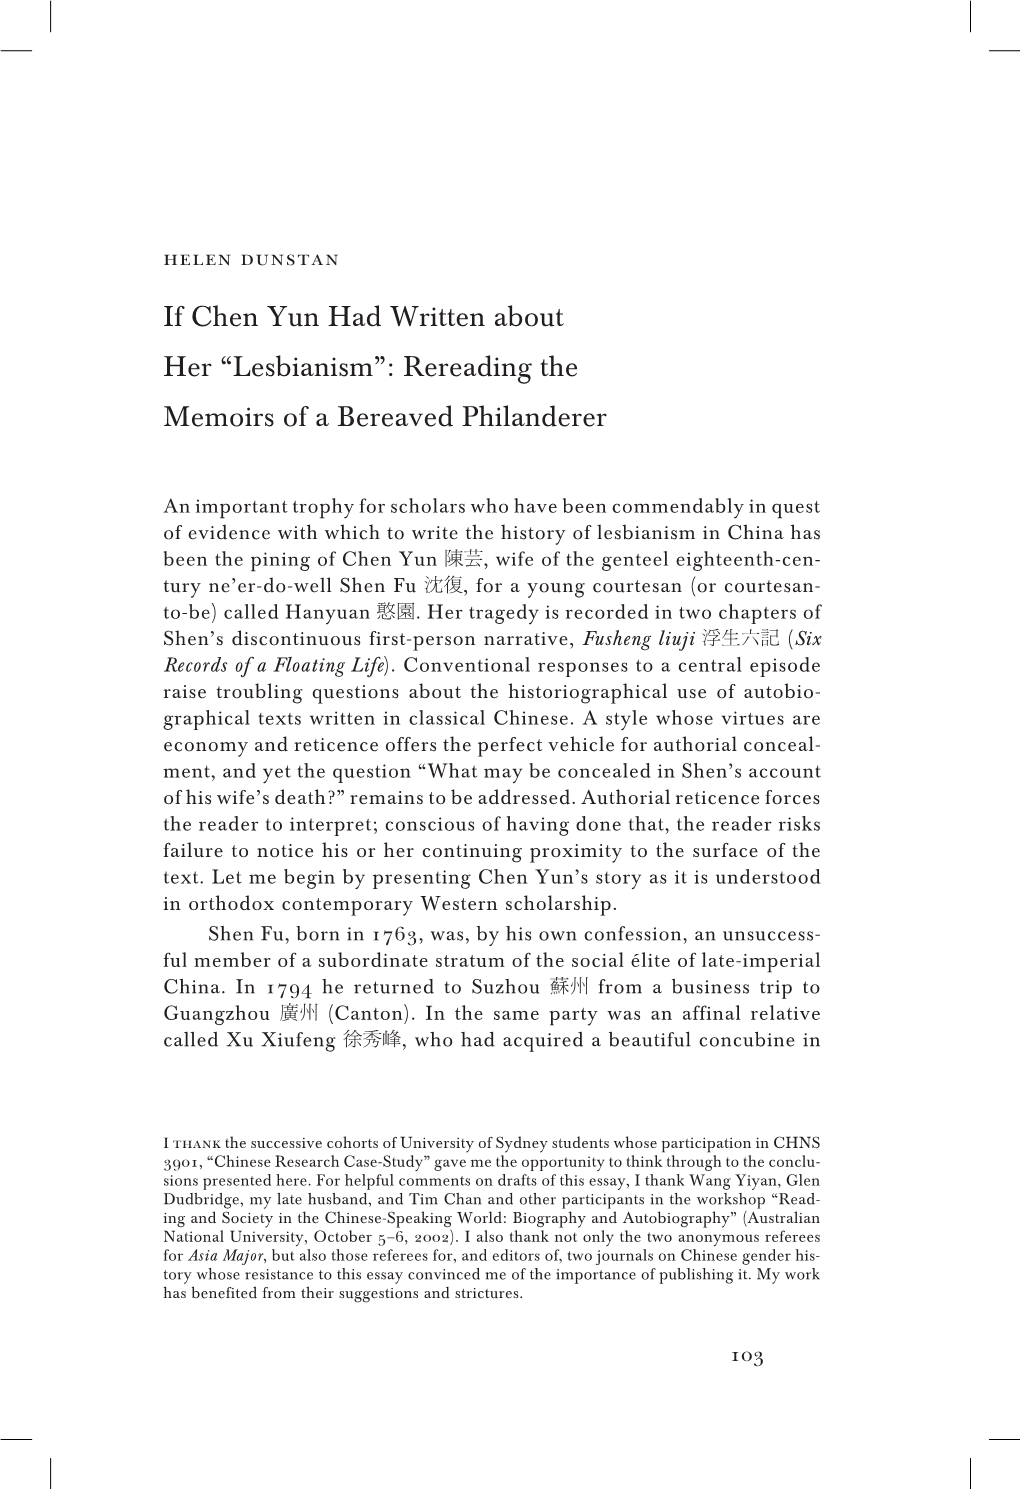 If Chen Yun Had Written About Her “Lesbianism”: Rereading the Memoirs of a Bereaved Philanderer